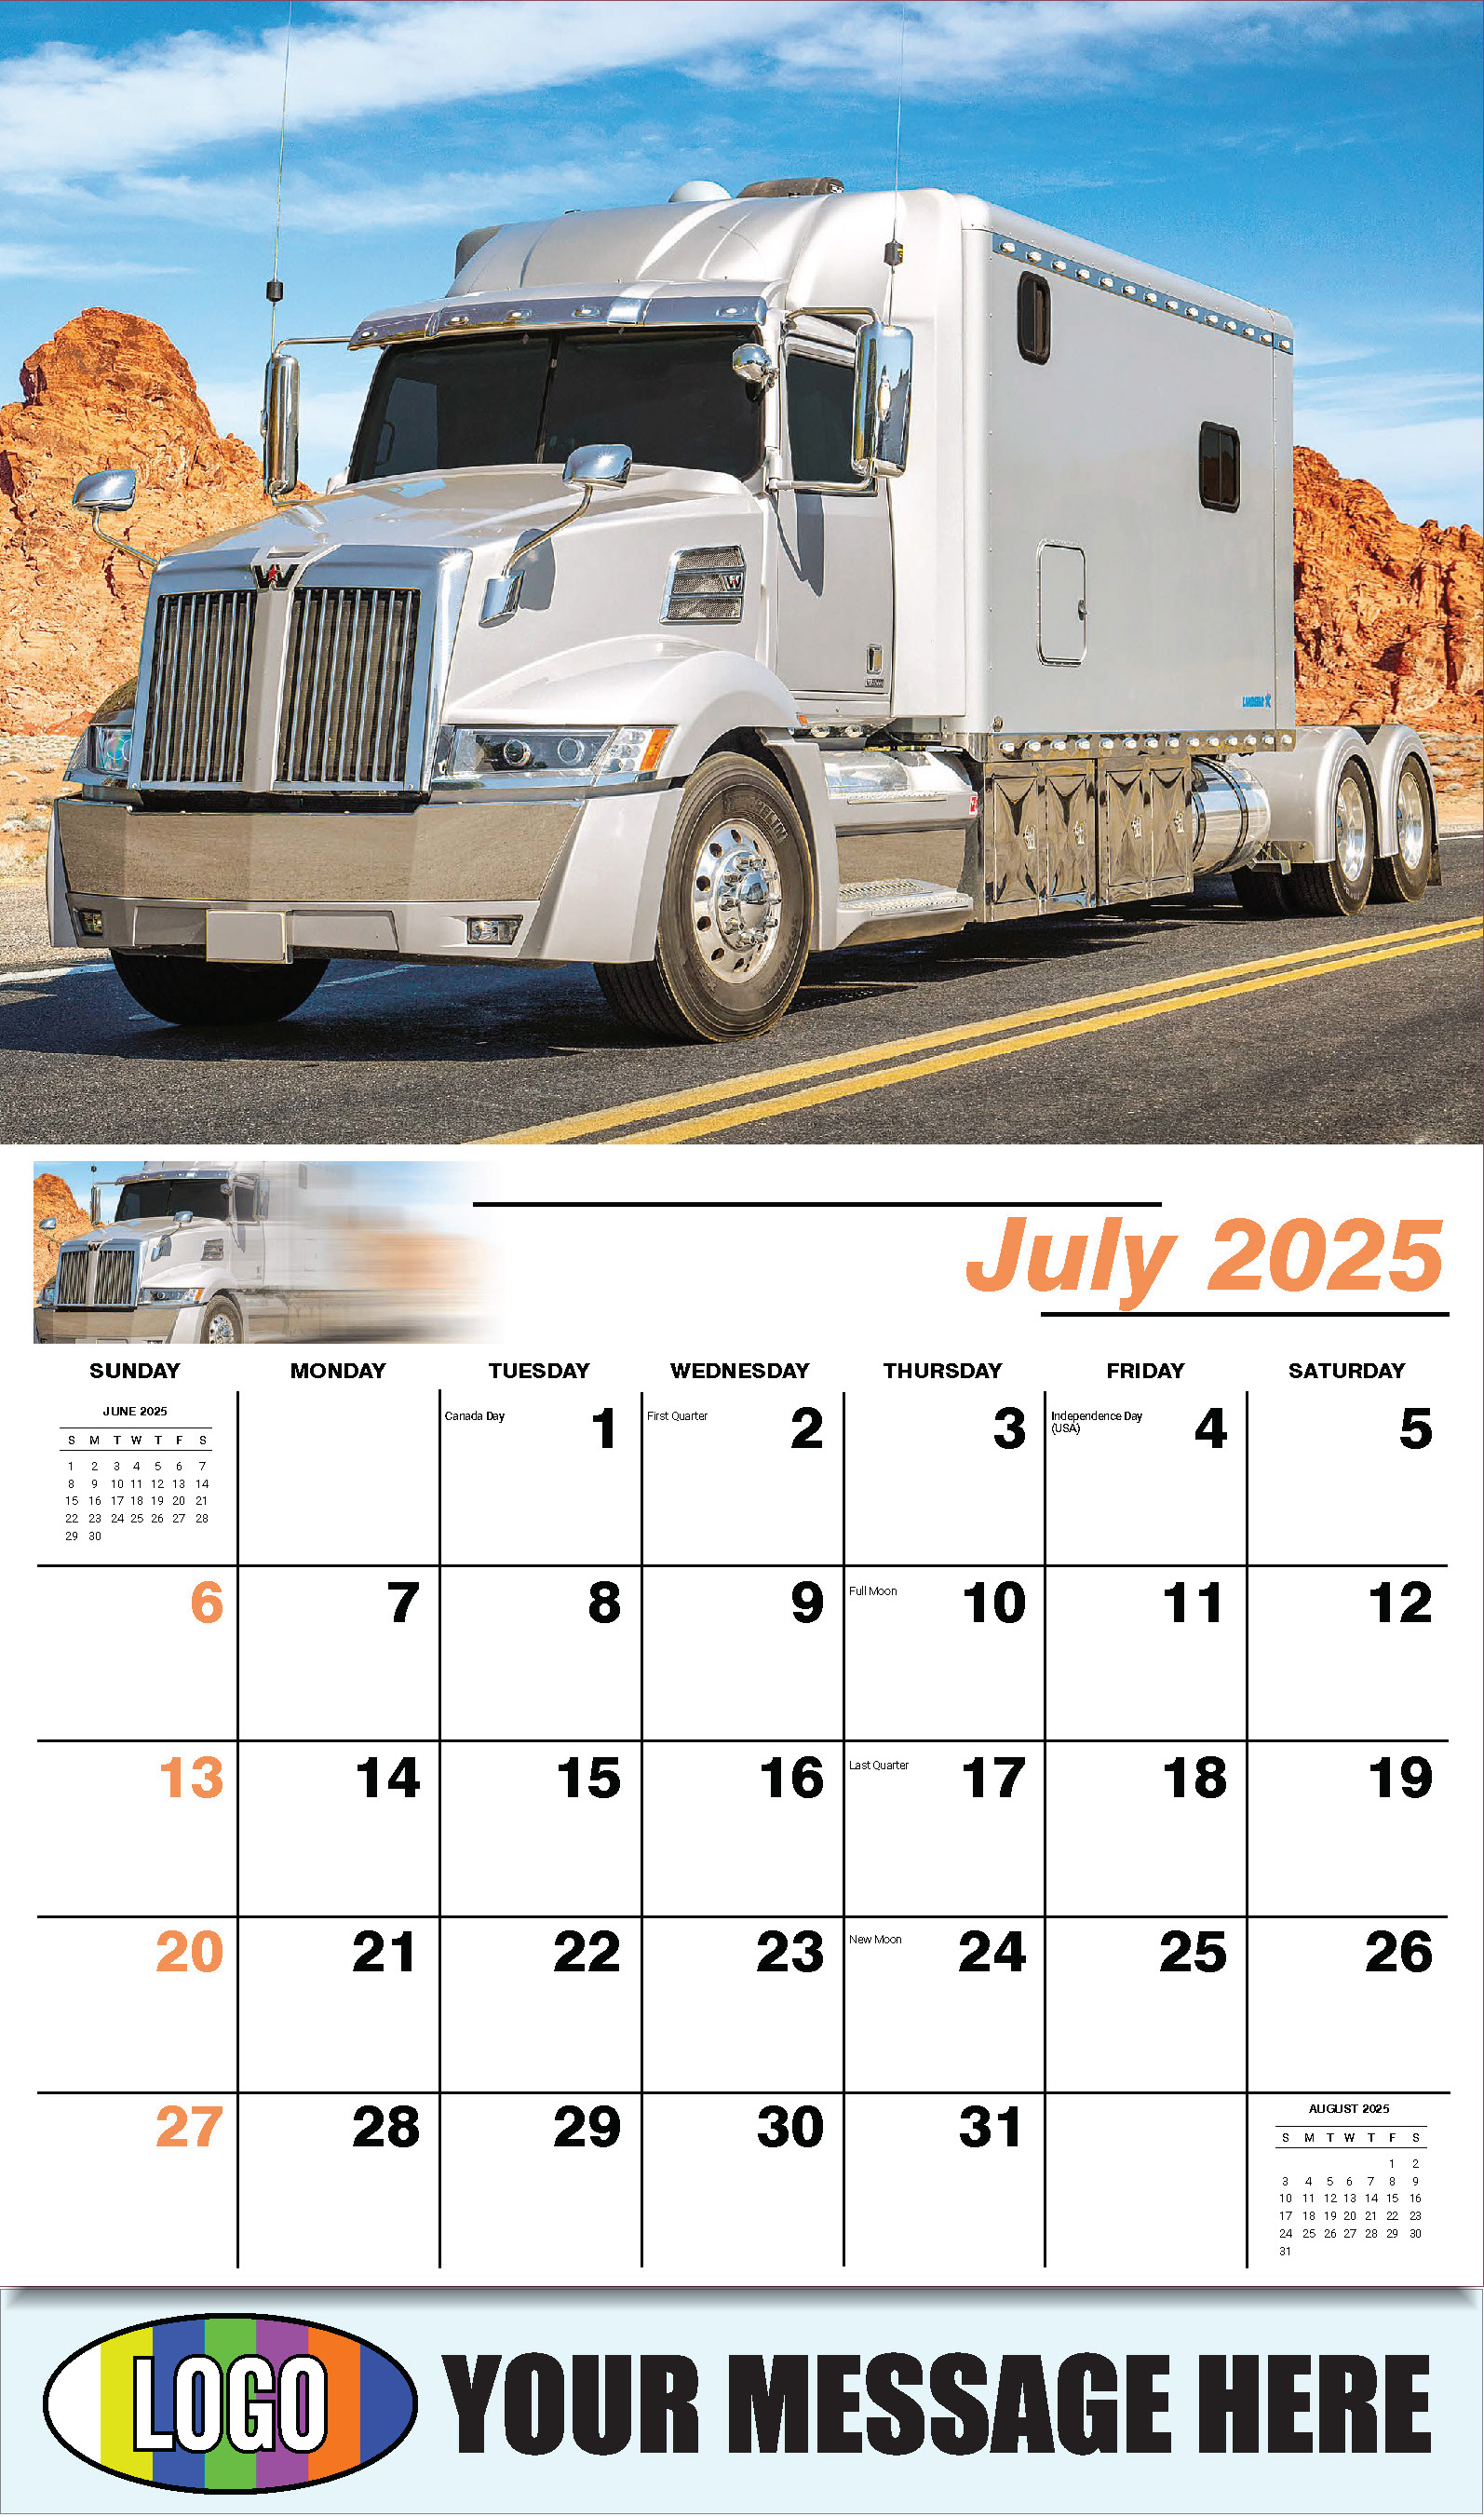 Kings of the Road 2025 Automotive Business Promotional Calendar - July